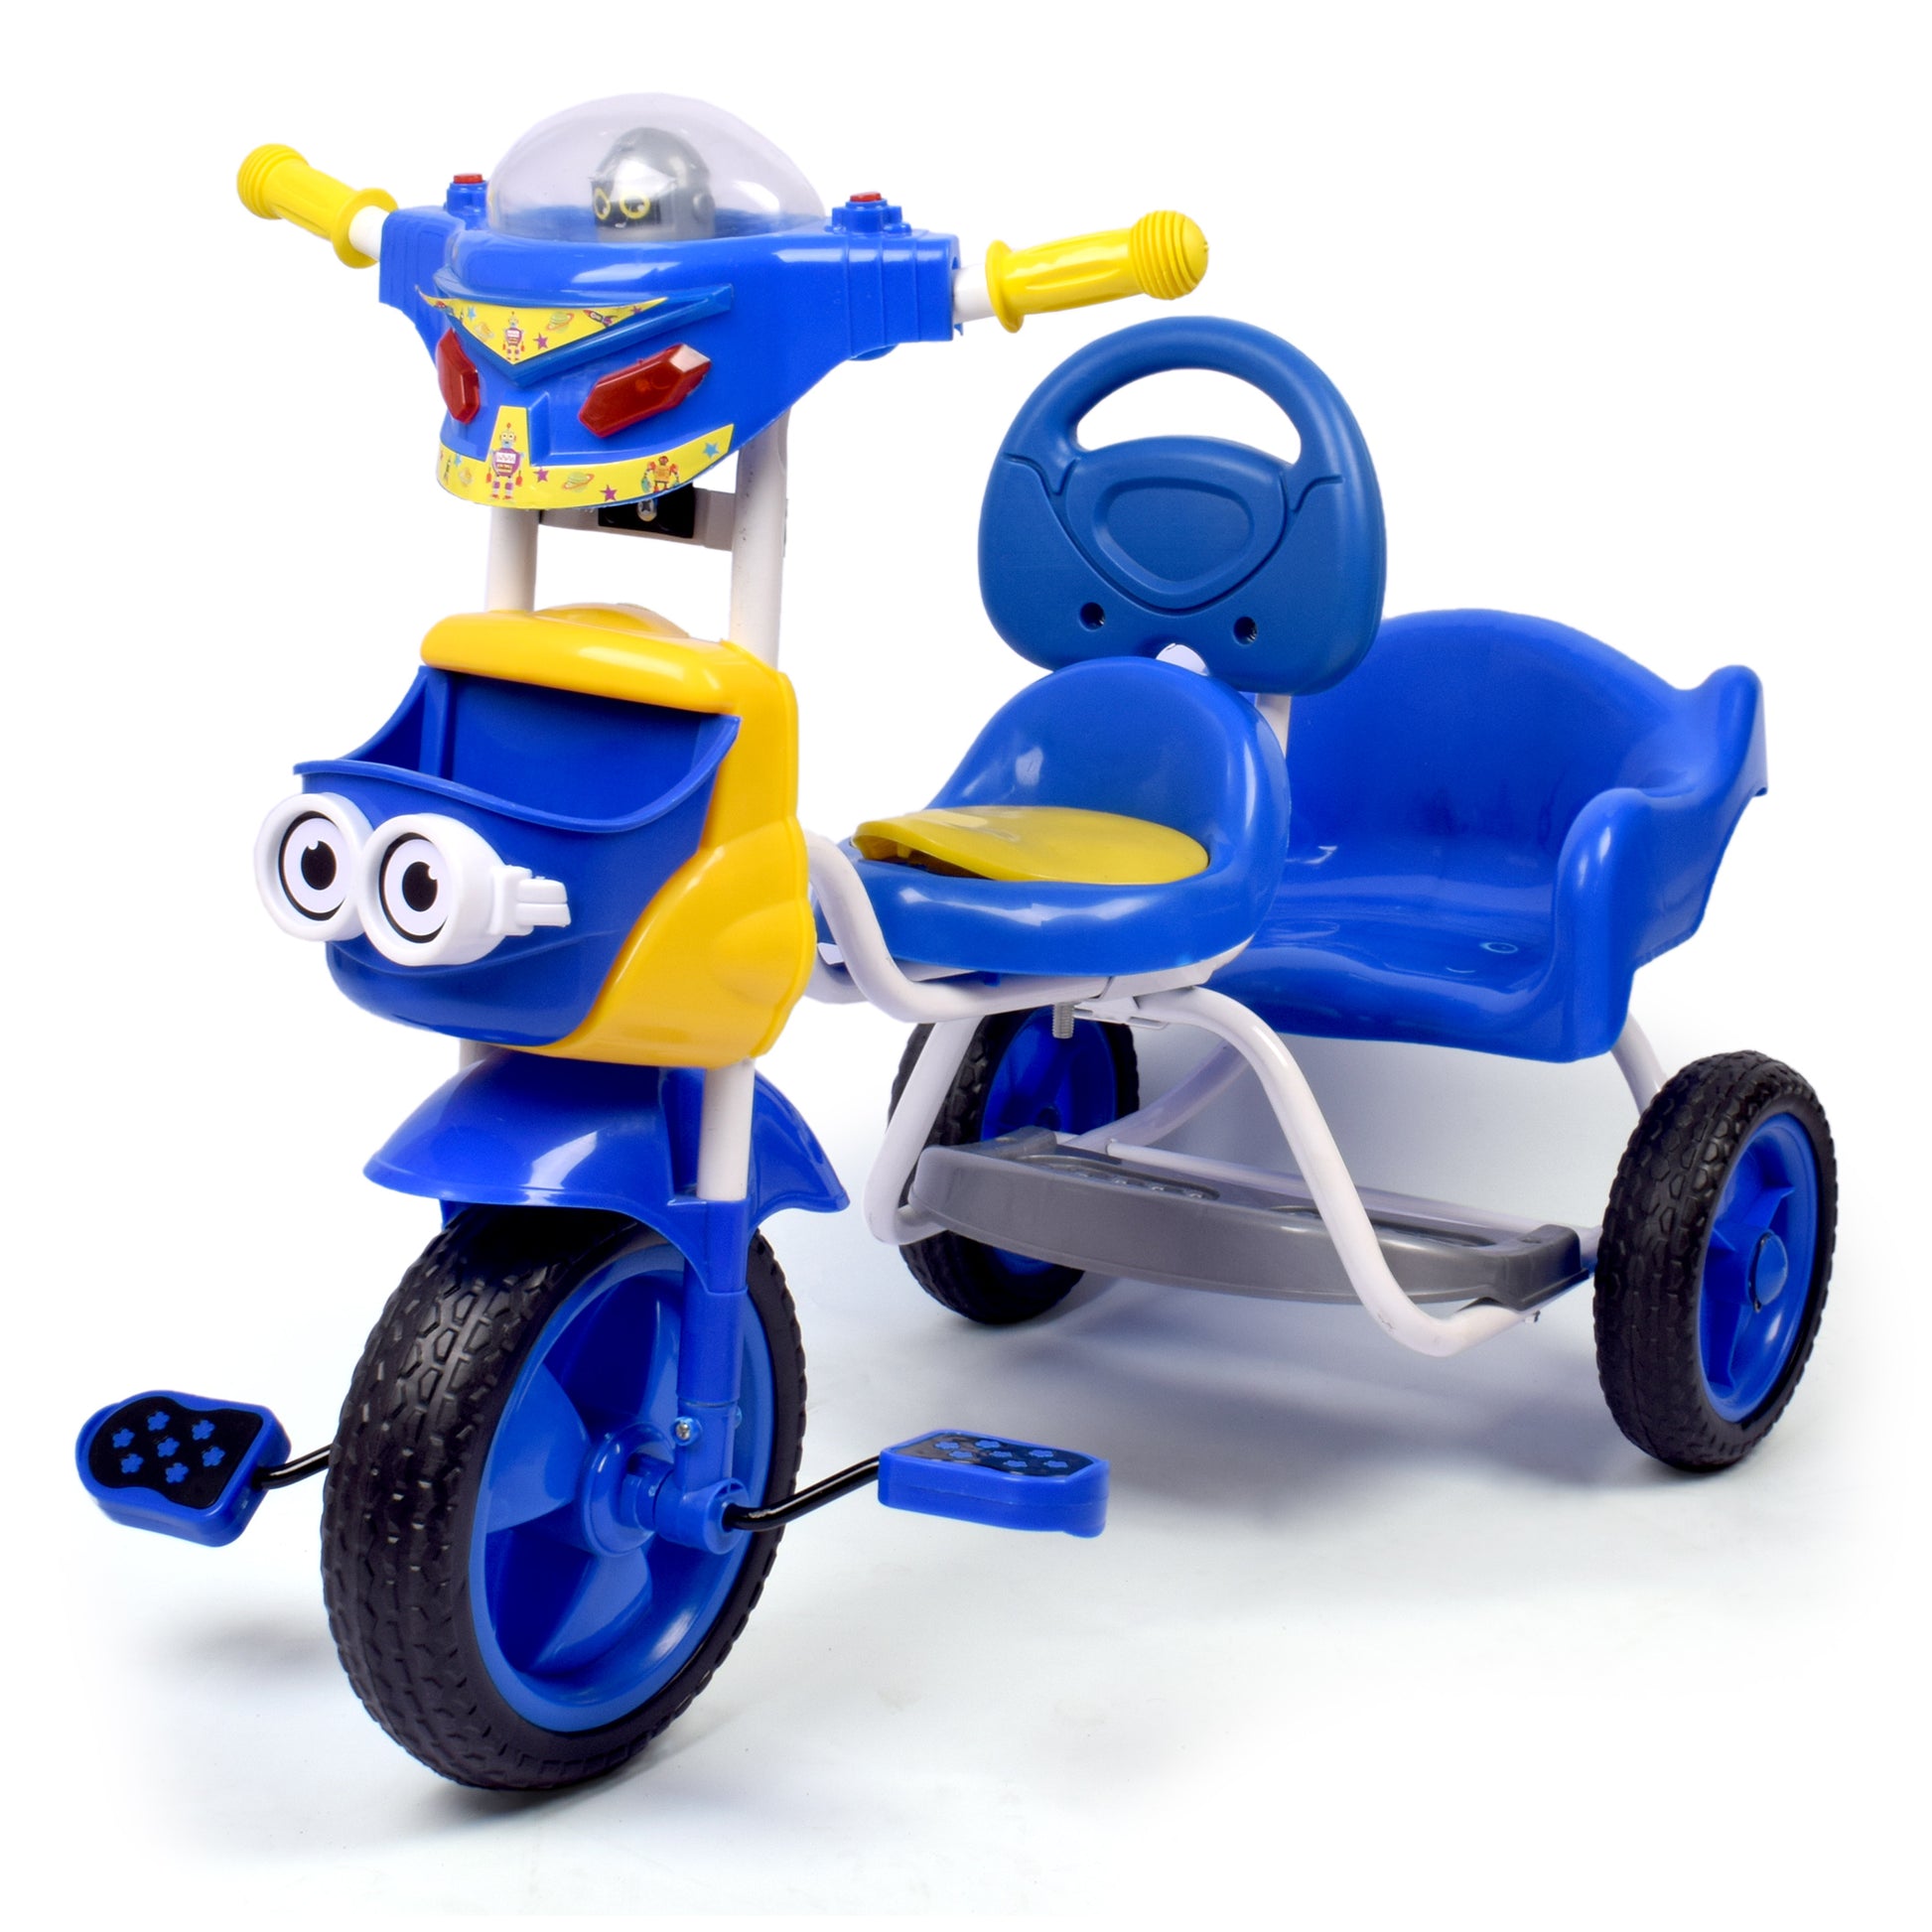 2 Kids Robot Tricycle